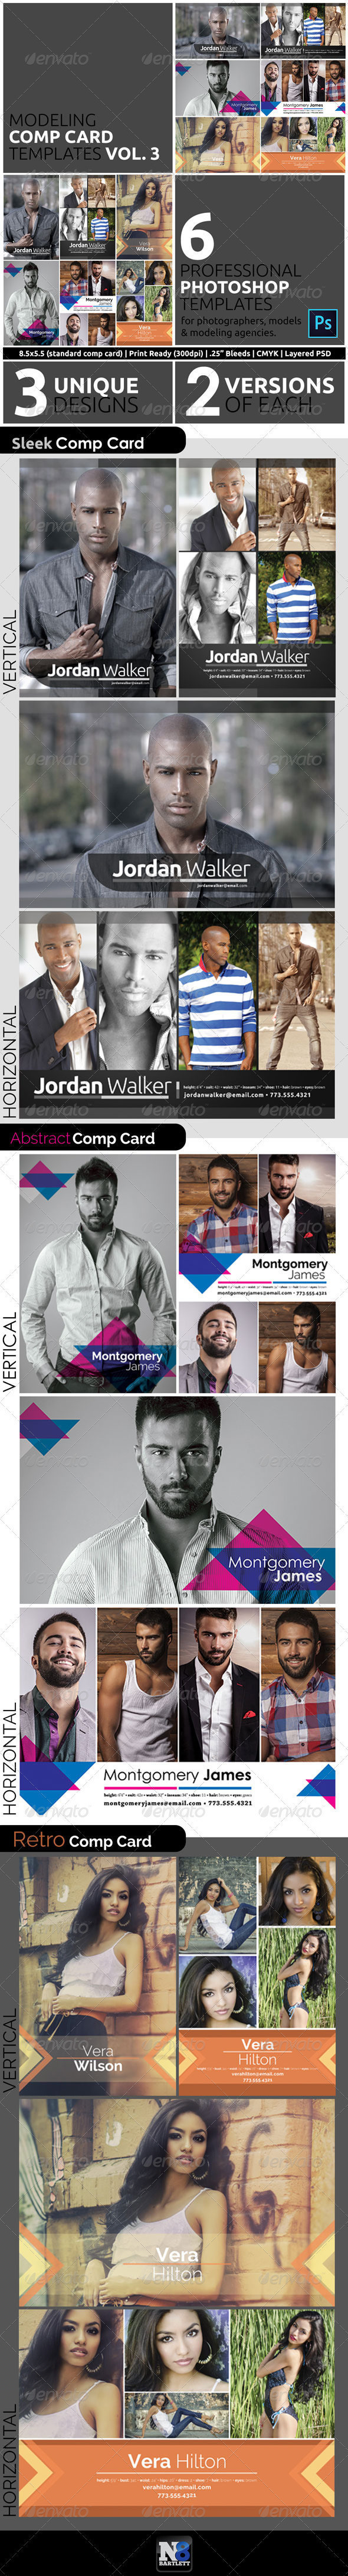 Model comp card template kit vol 3 preview